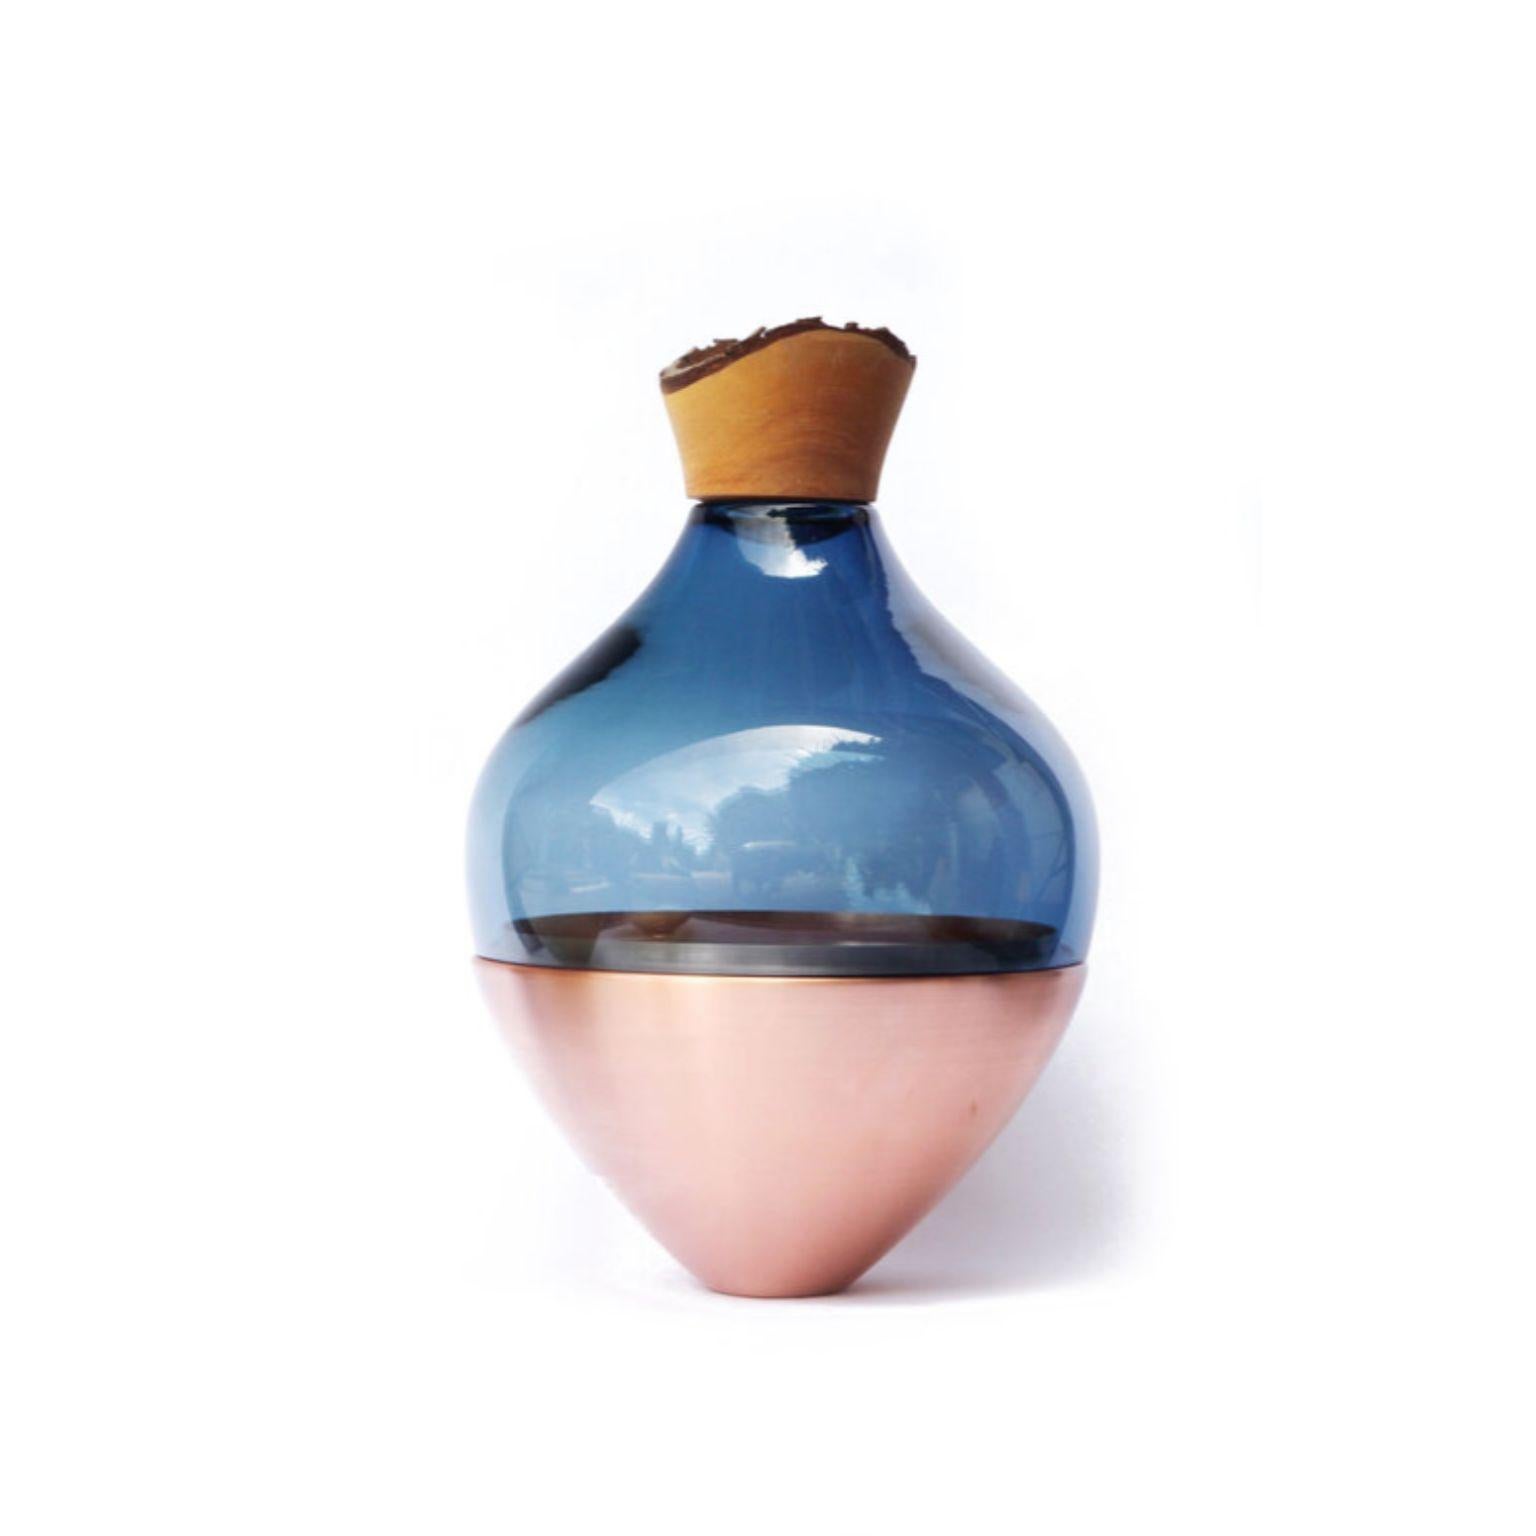 Blue and Copper Sculpted Blown Glass India Stacking Vessel, Pia Wüstenberg
Dimensions: height 20 x diameter 38cm
Materials: hand blown glass, Copper

Pia Wüstenberg, Utopia
Pia Wüstenberg is a creative with a passion for materials and craft. She